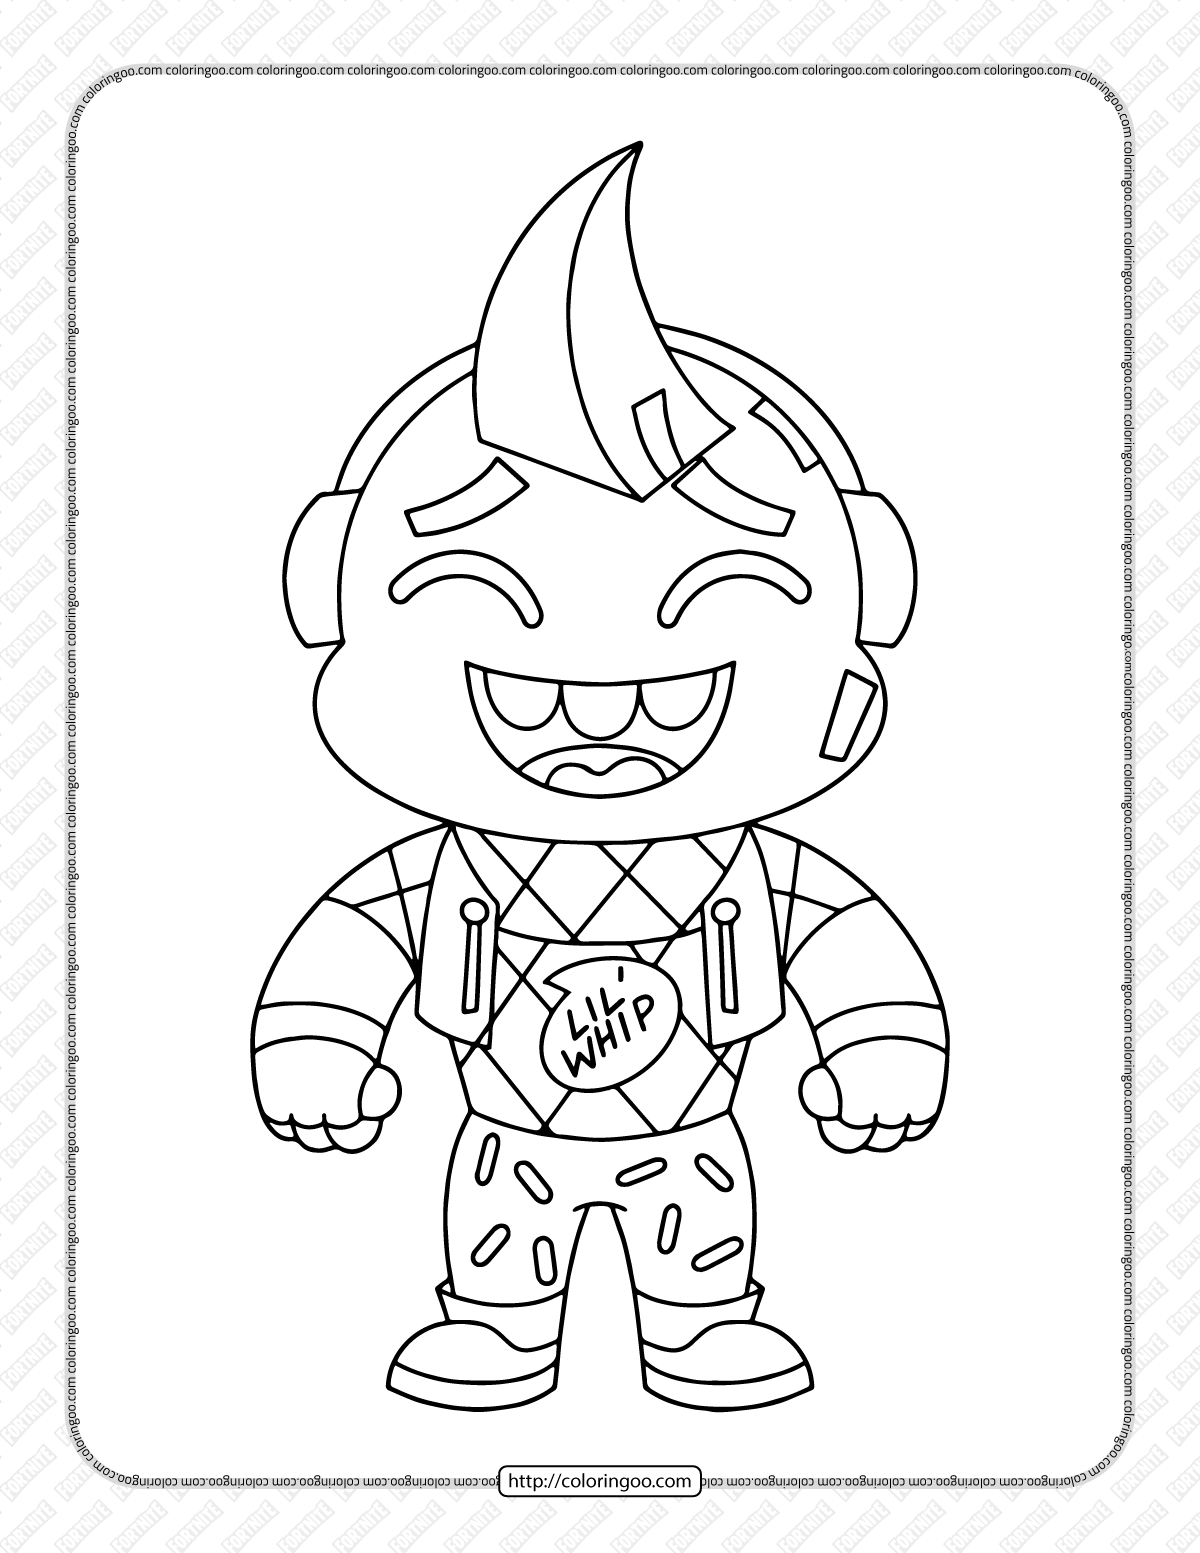 chibi fortnite coloring pages 34